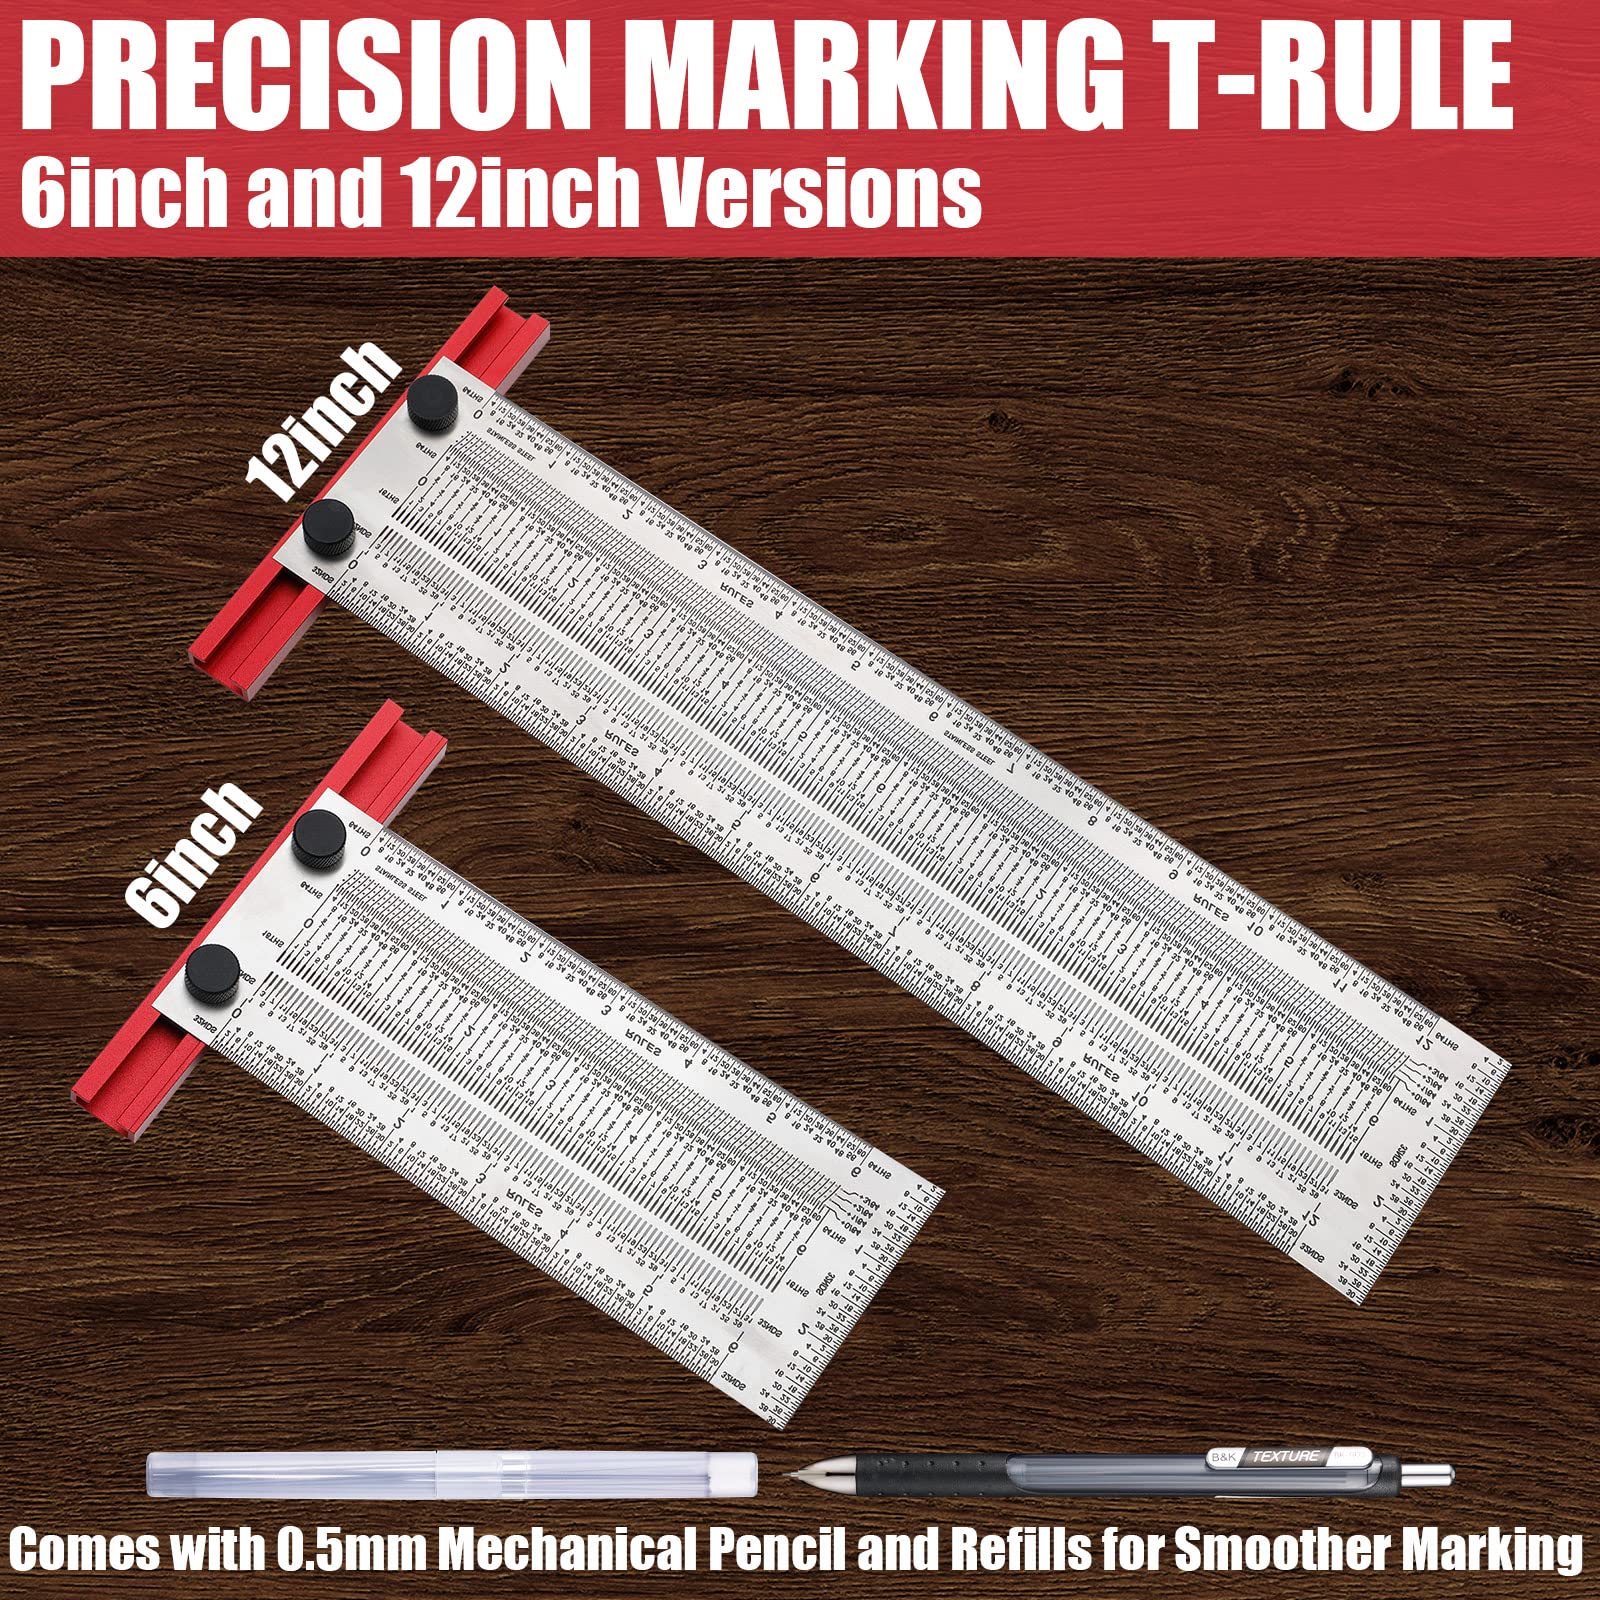 4 Pieces Precision Marking T Rule Set T Square Precision Marking T Rule Includes Compatible Pencil with 0.3 mm Mechanical Pencil Refill for Woodworking(6 Inch, 12 Inch)